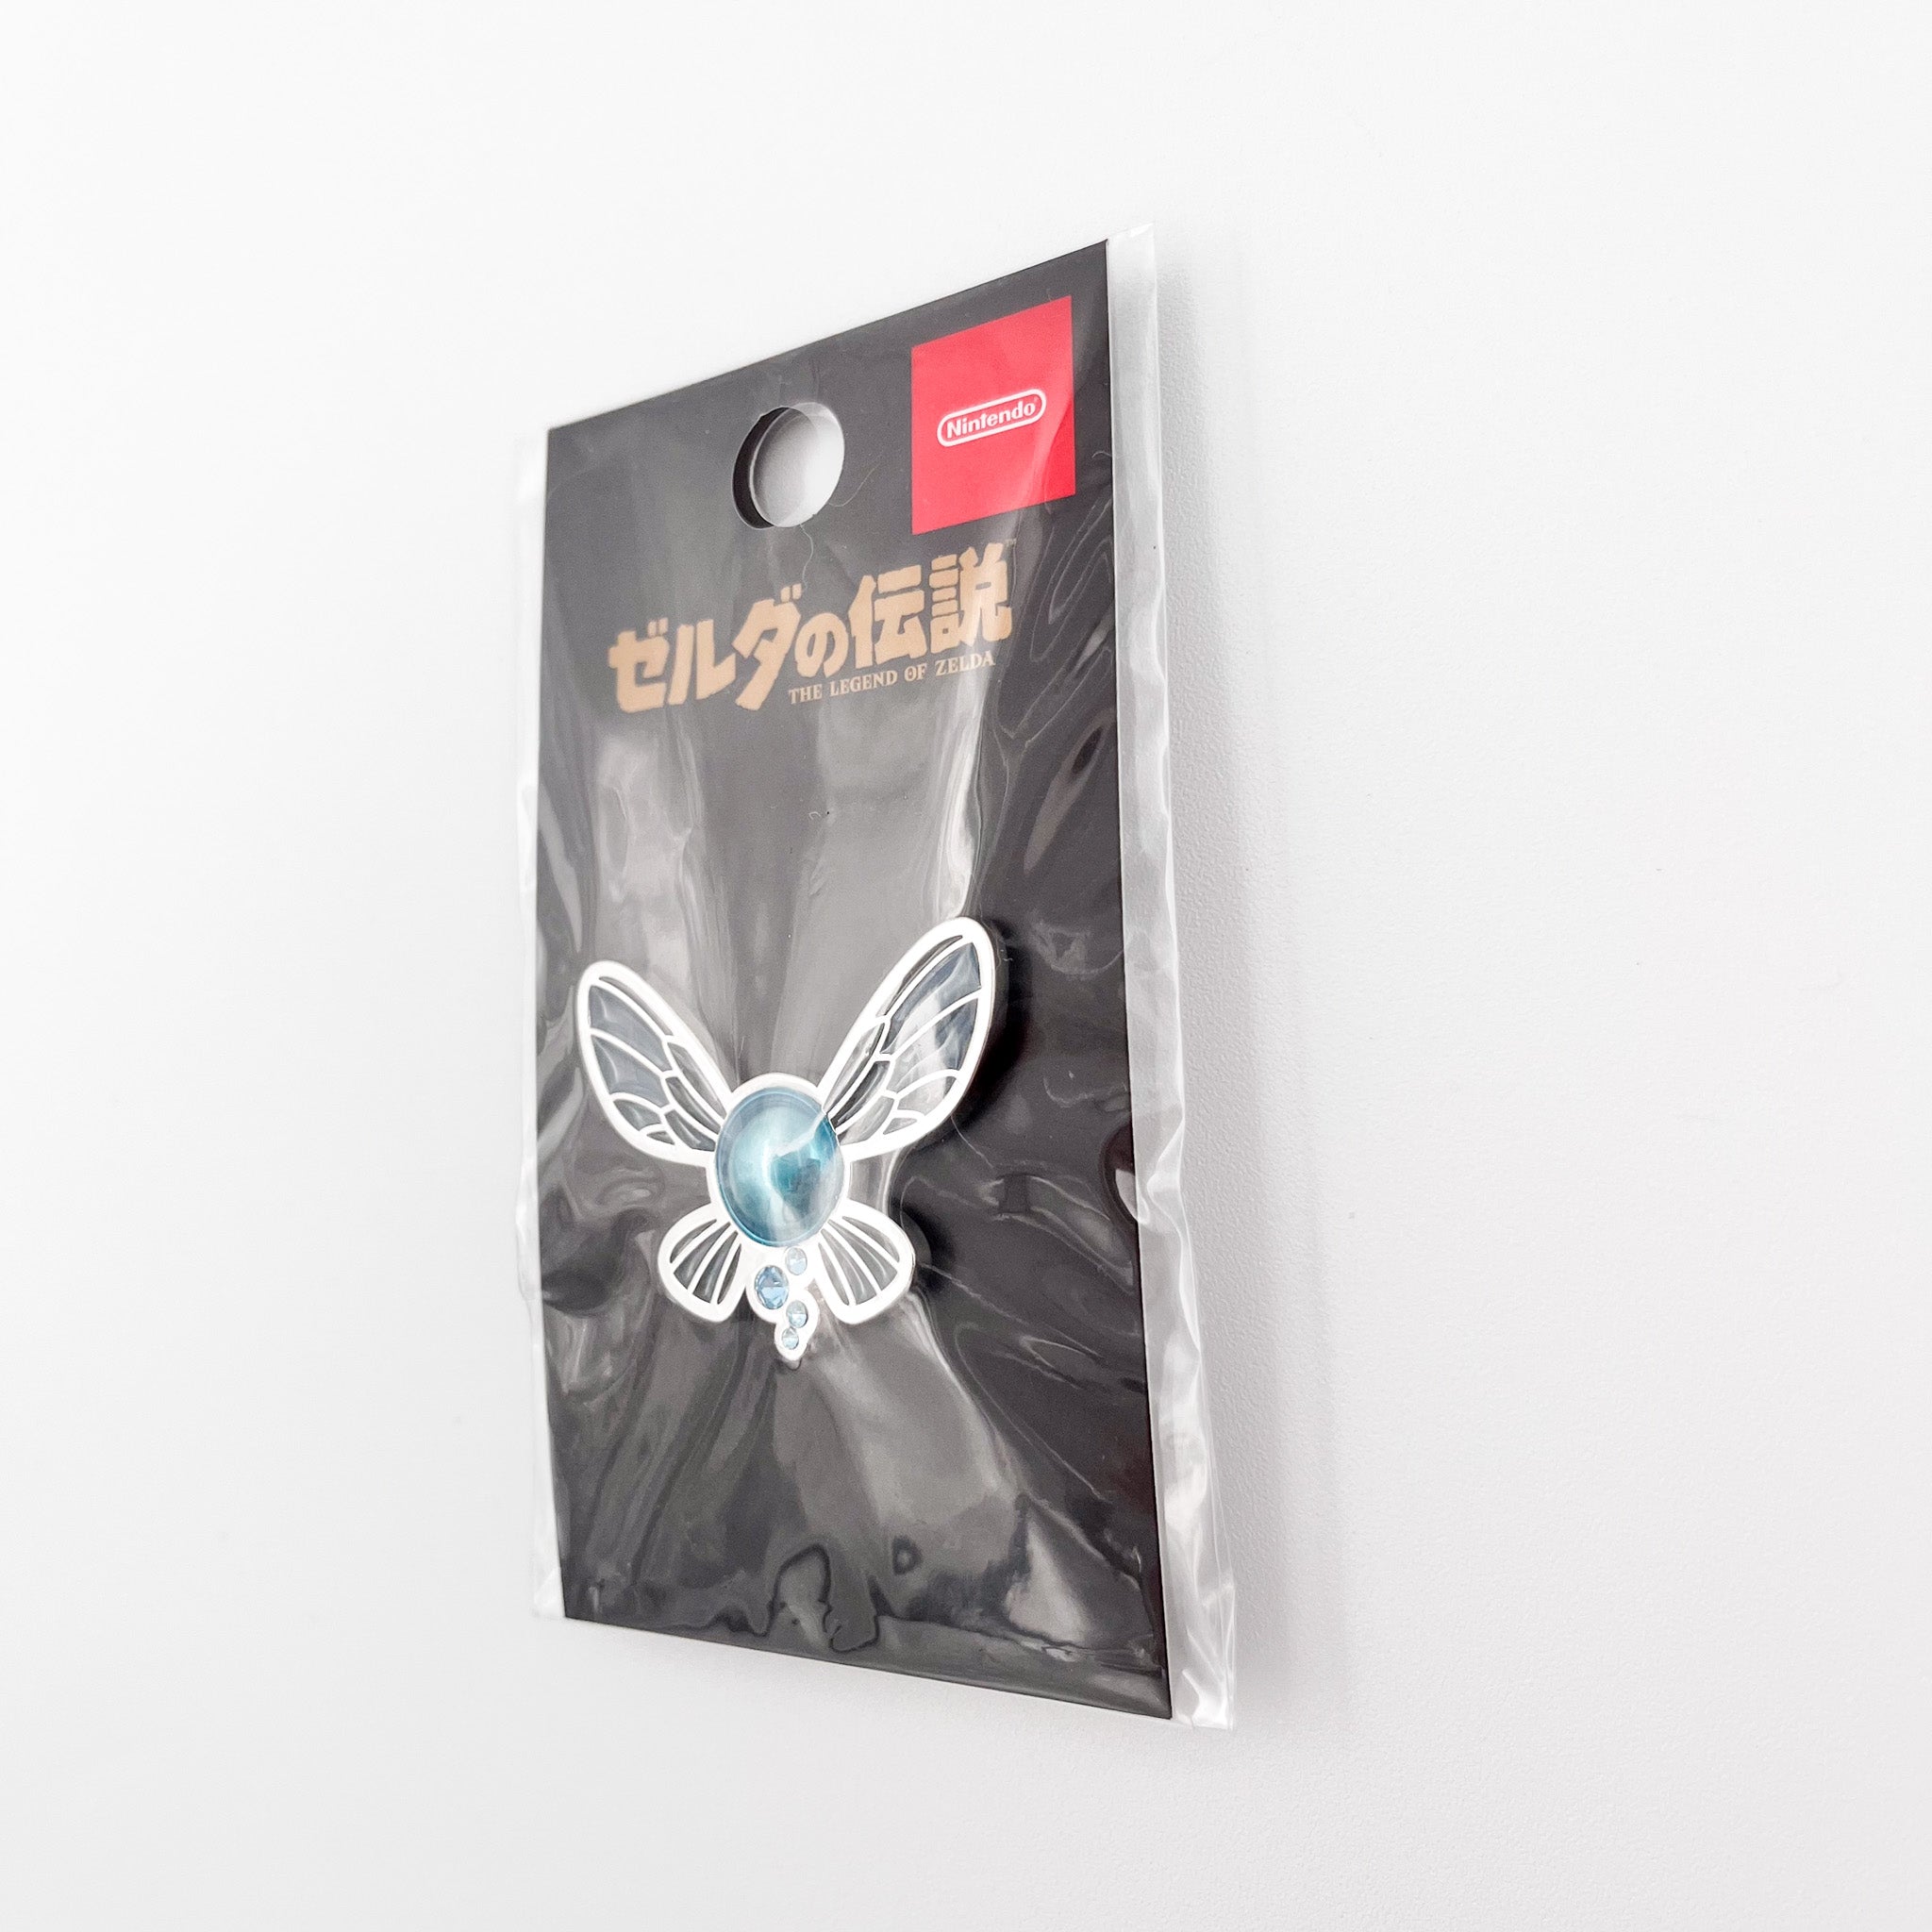 side view of the navi pin sold at Nintendo Tokyo in Japan